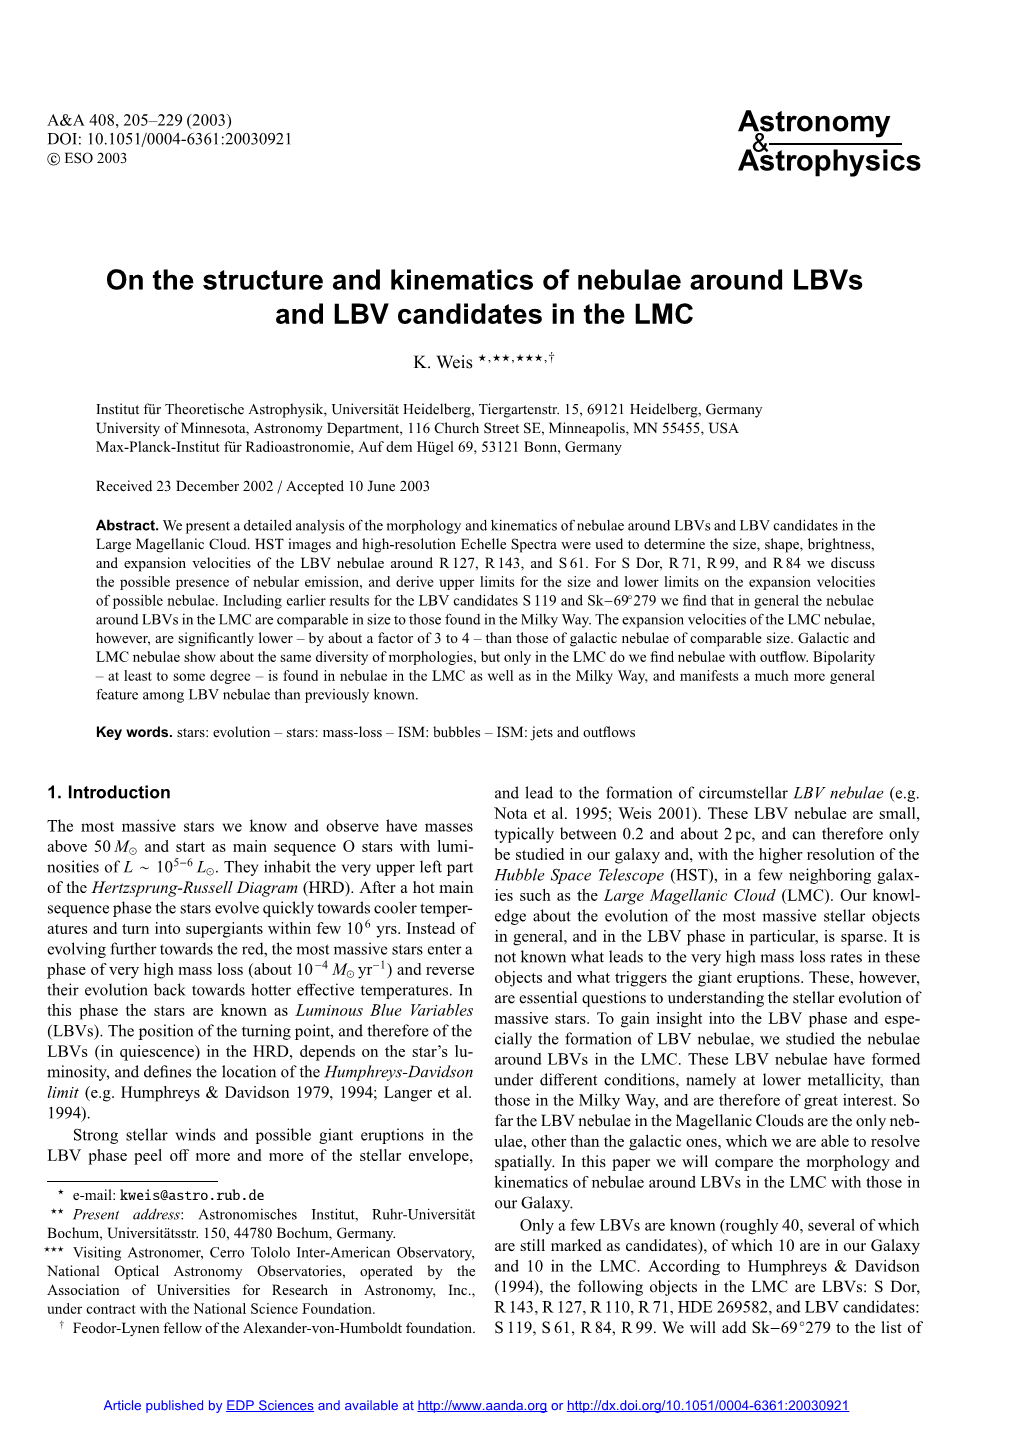 On the Structure and Kinematics of Nebulae Around Lbvs and LBV Candidates in the LMC